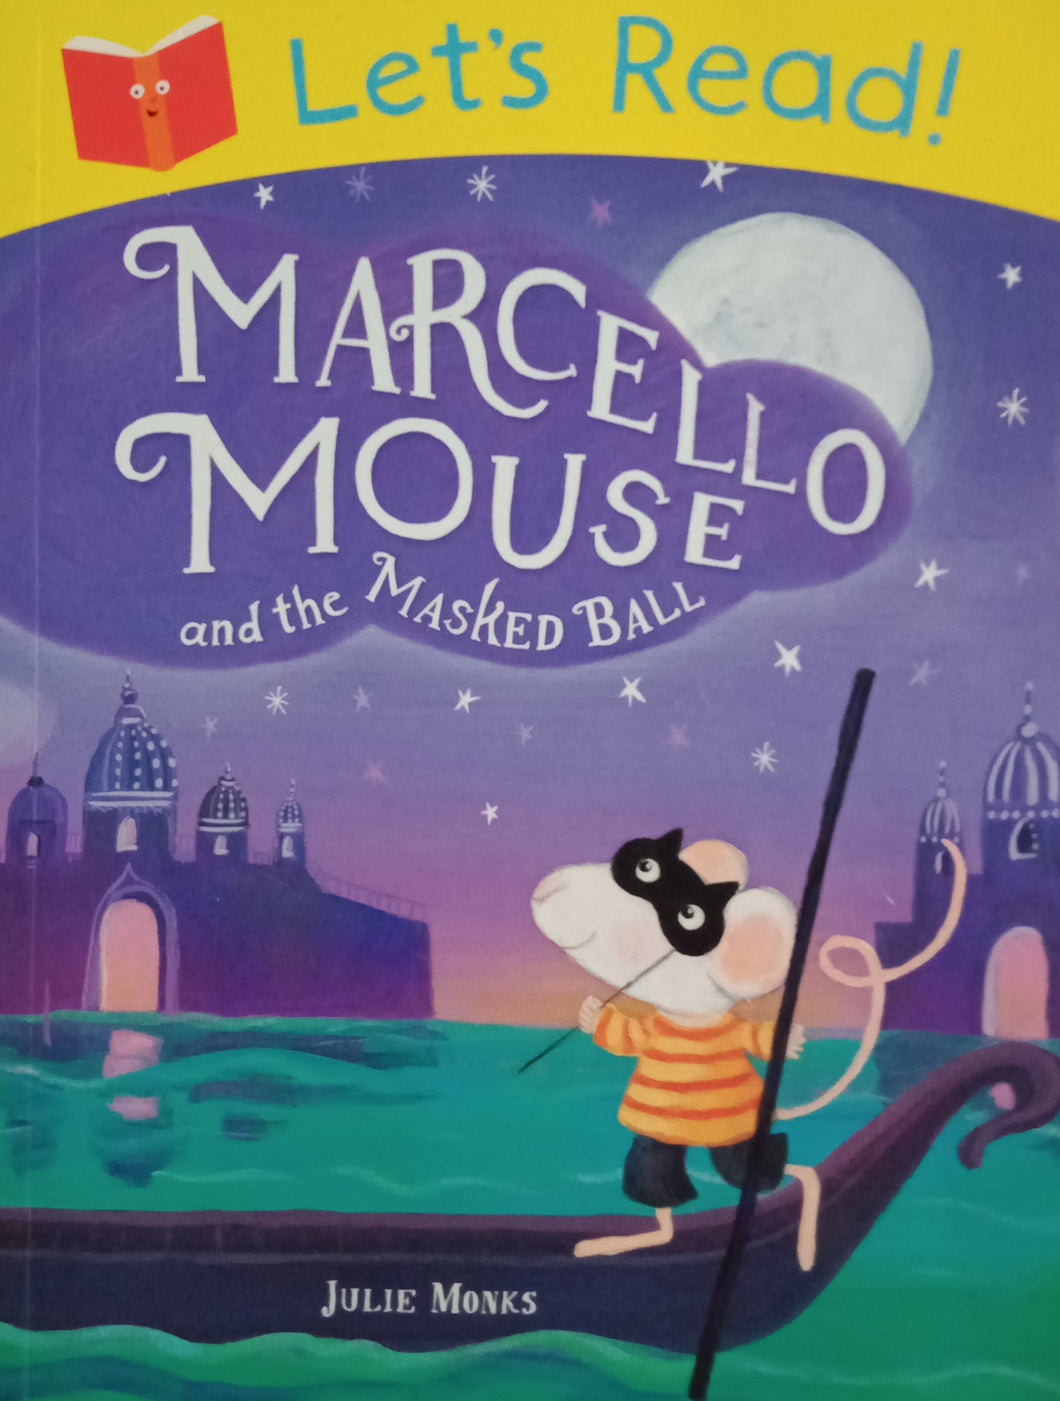 Marcello Mouse by Julie Monks